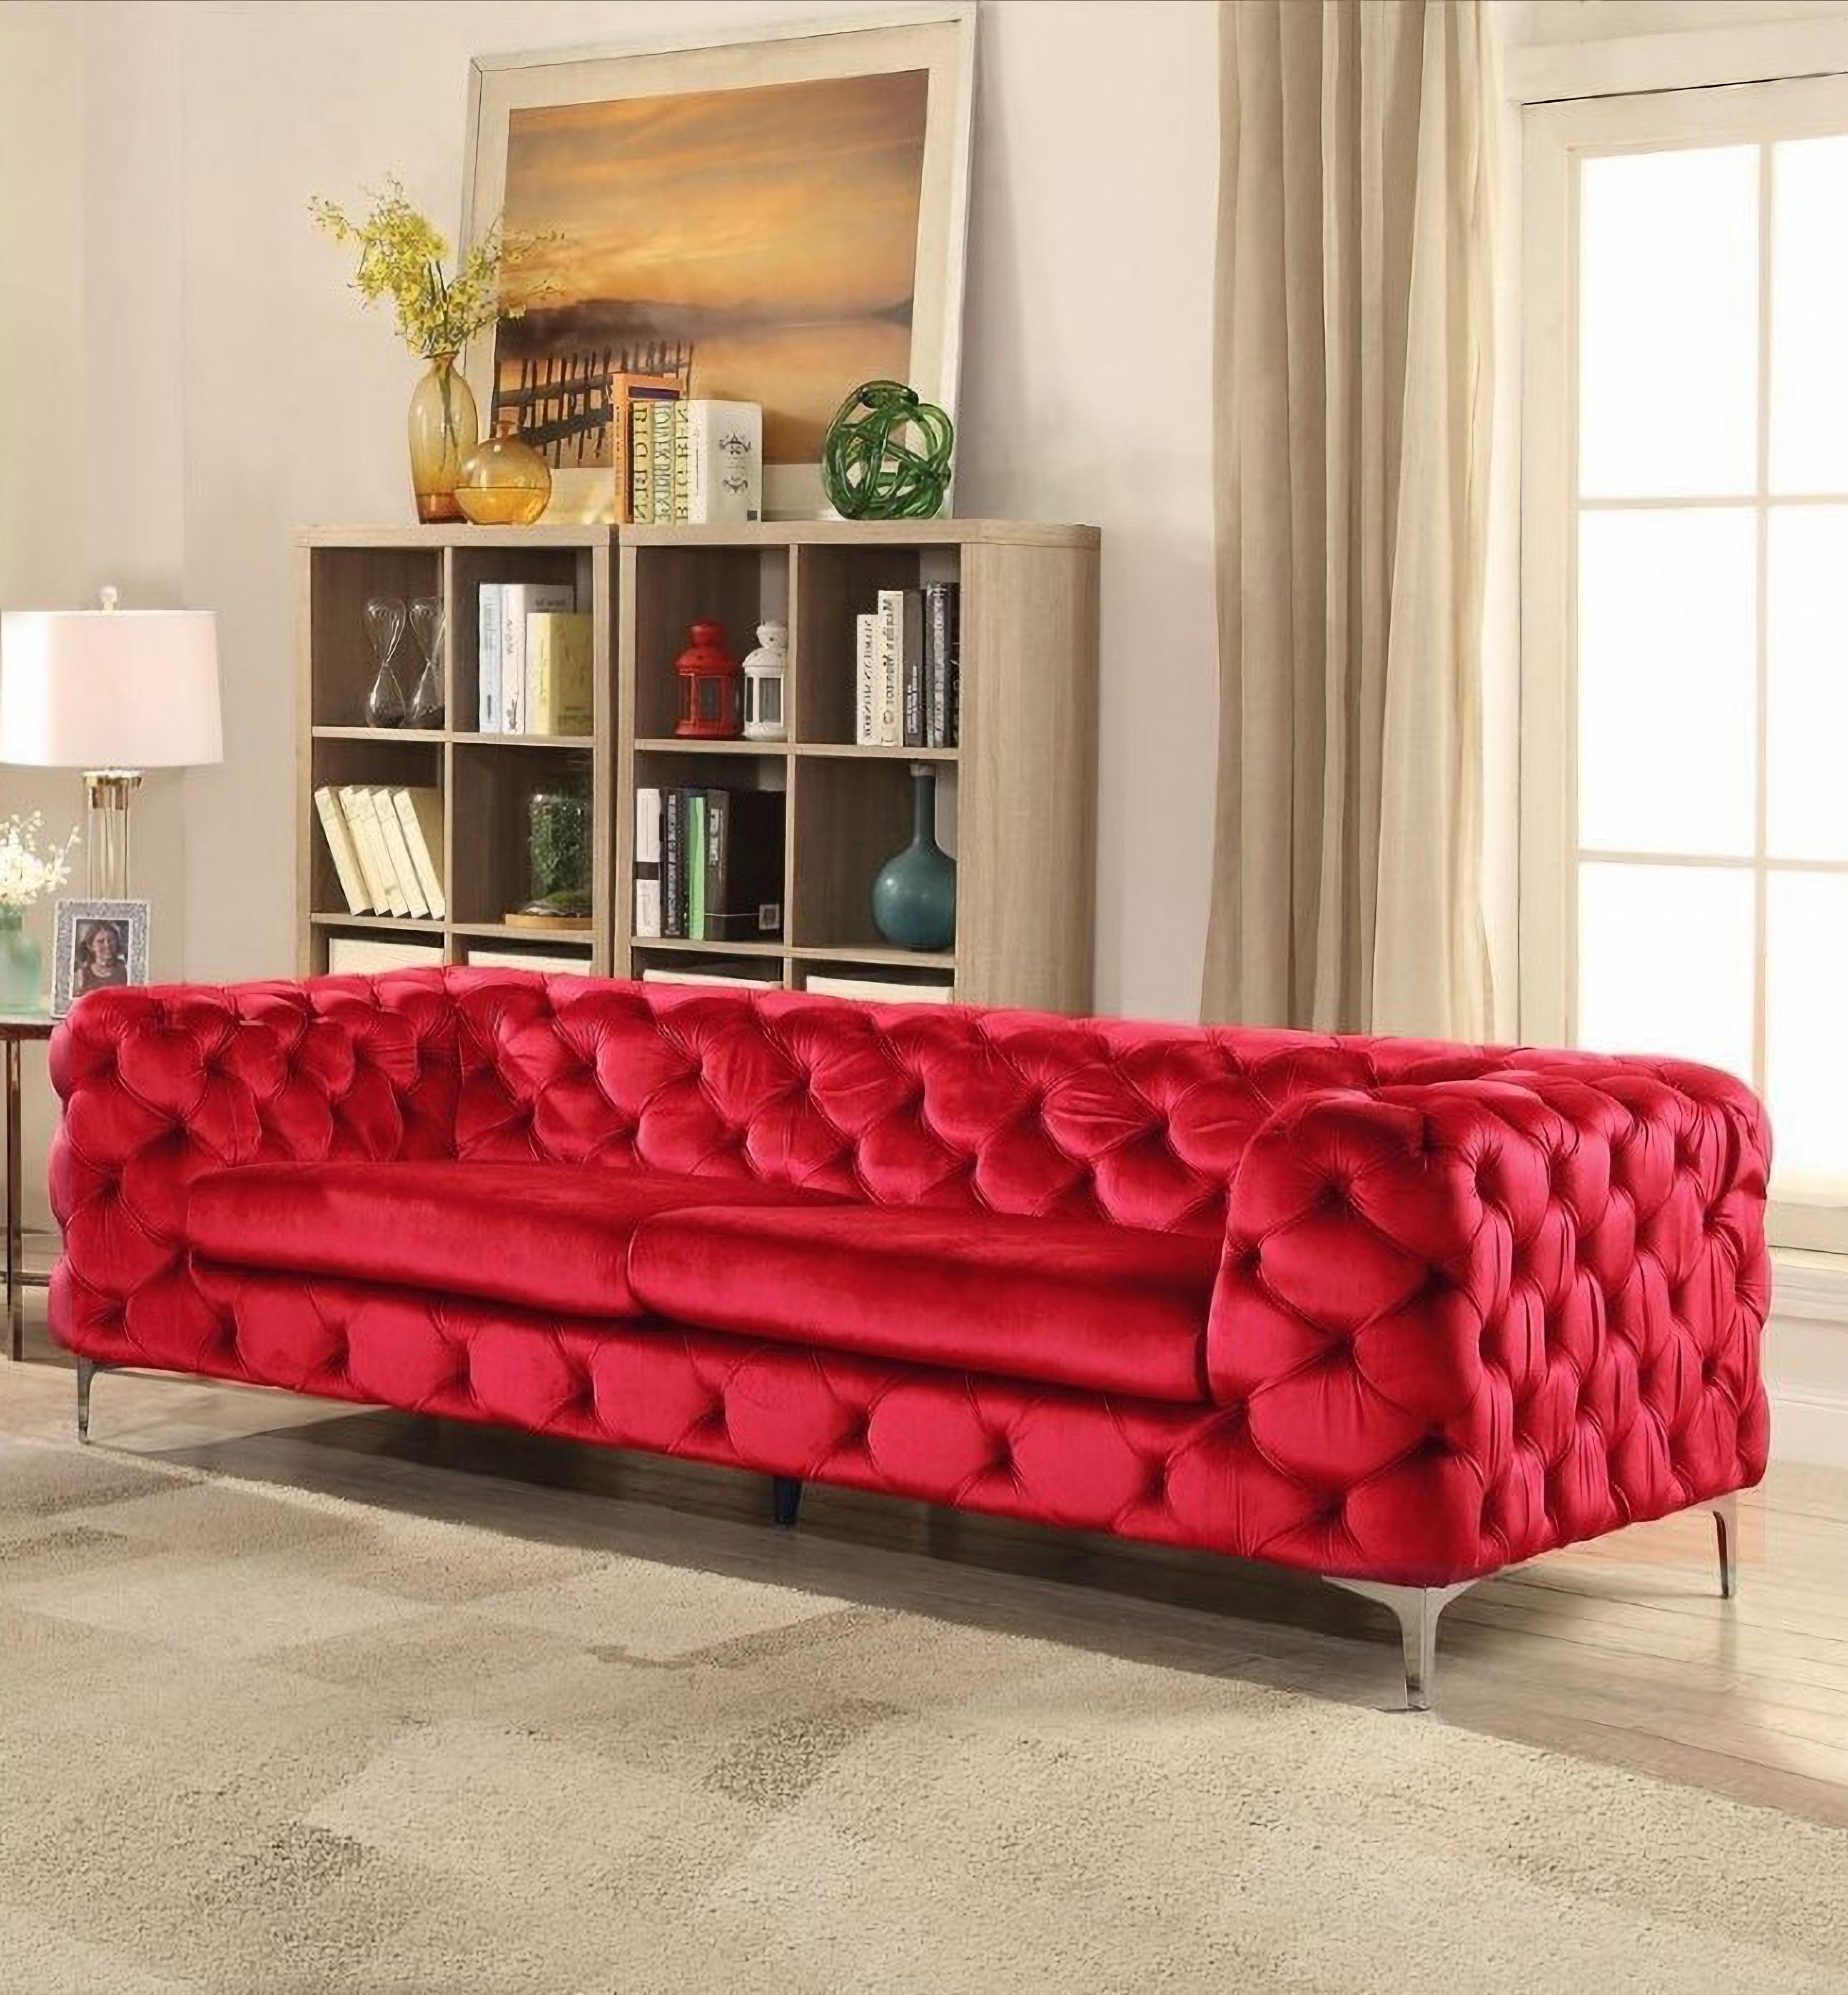 Chester 3 seater sofa, Red Wine velvet new.

DATA SHEET:

-Design sofa, 3 seats.

-Made with solid wooden structure.

-High-density polyurethane foam.

-Upholstered in green velvet

-Chrome metal legs.

-Other colors available.

-